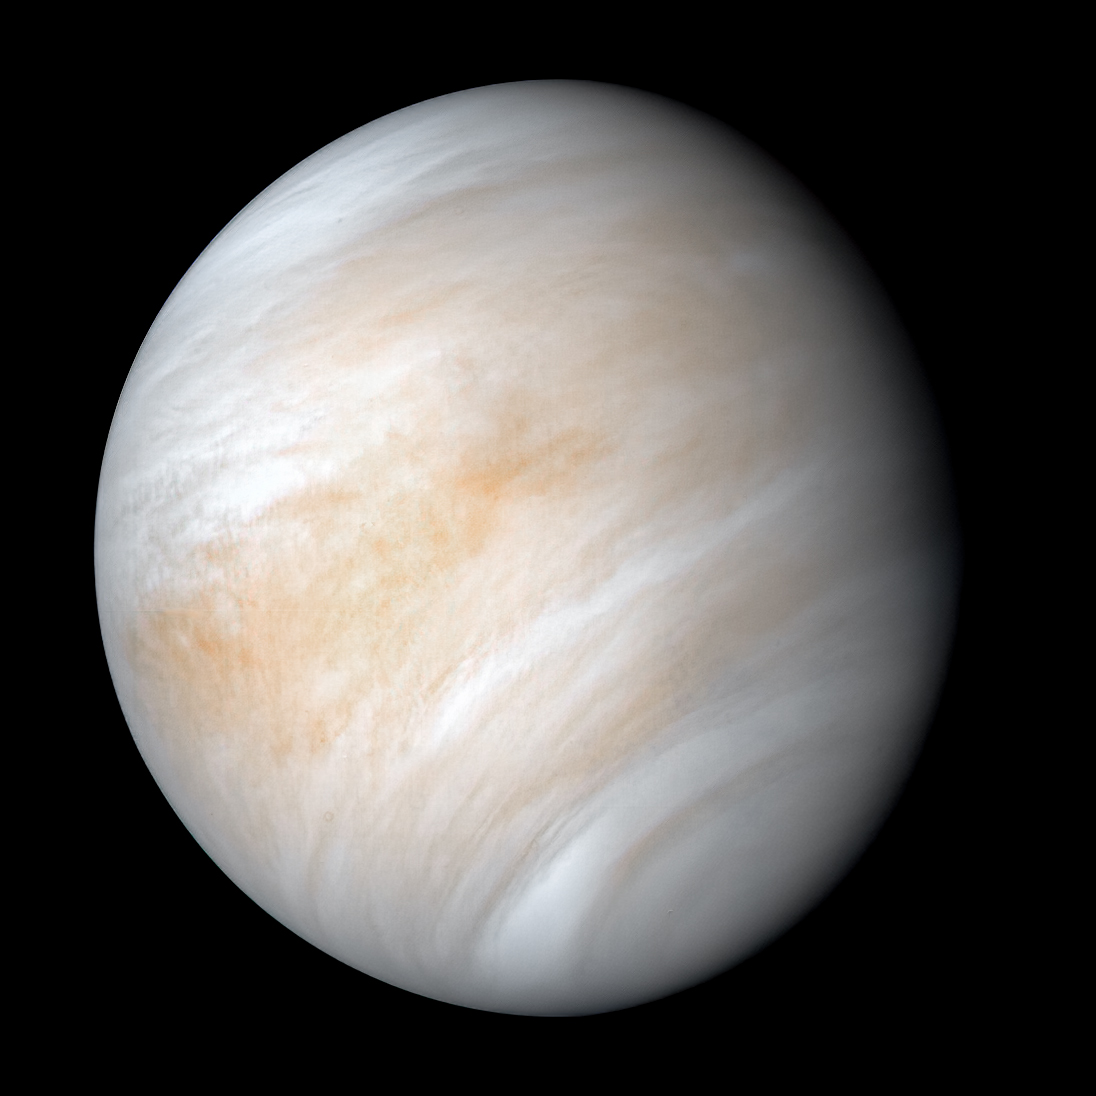 2023 Mission to Venus Will Search For the Signs of Life in Acidic Clouds